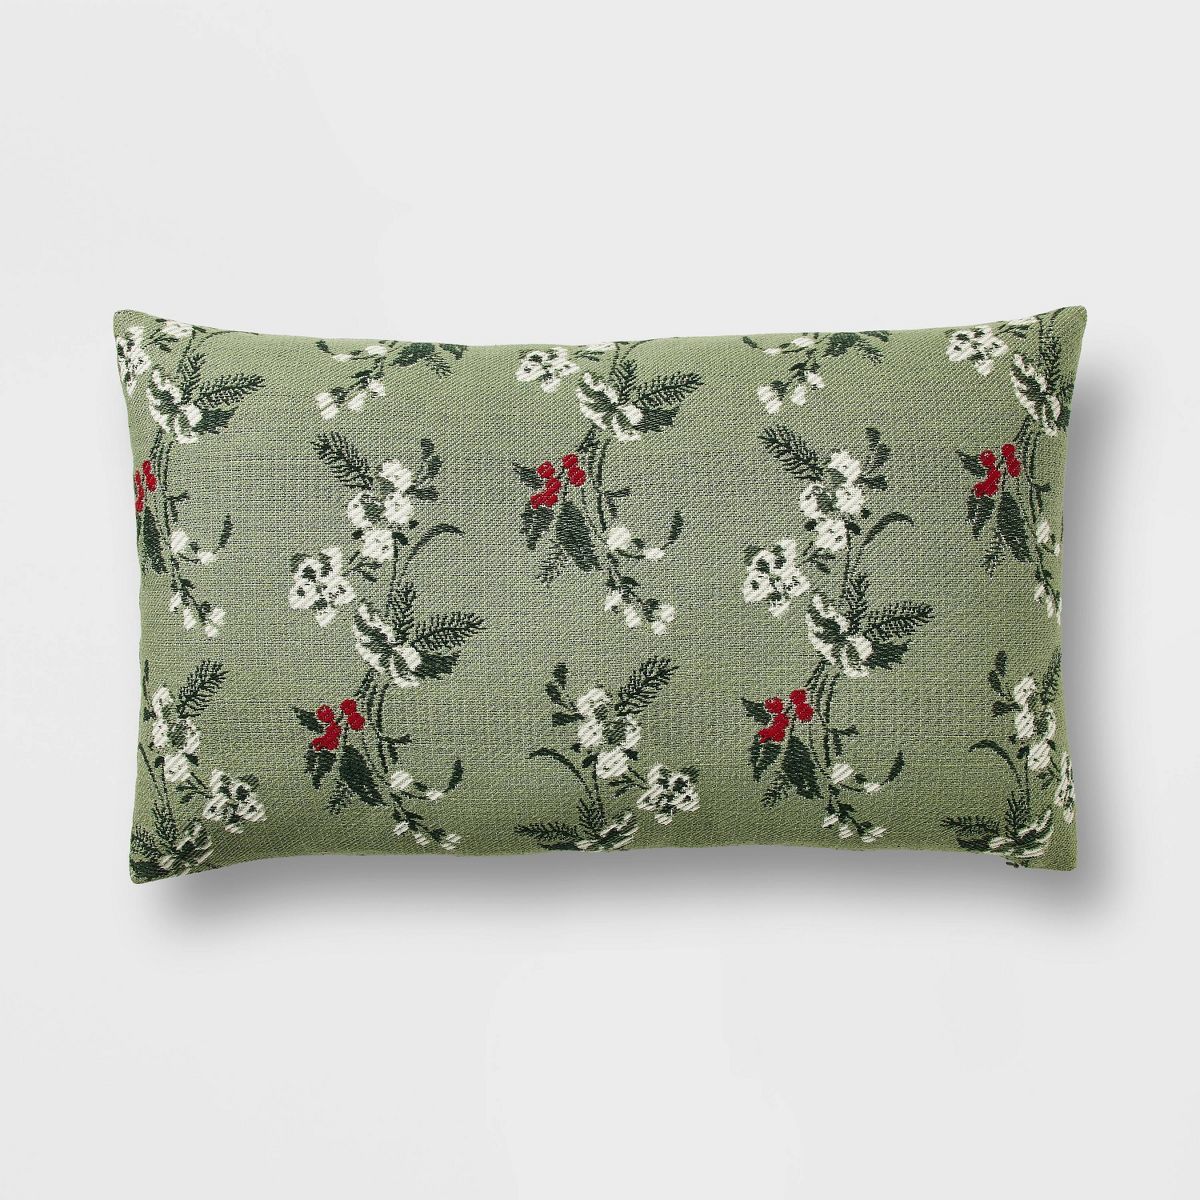 Oversized Printed Floral Throw Pillow - Threshold™ designed with Studio McGee | Target